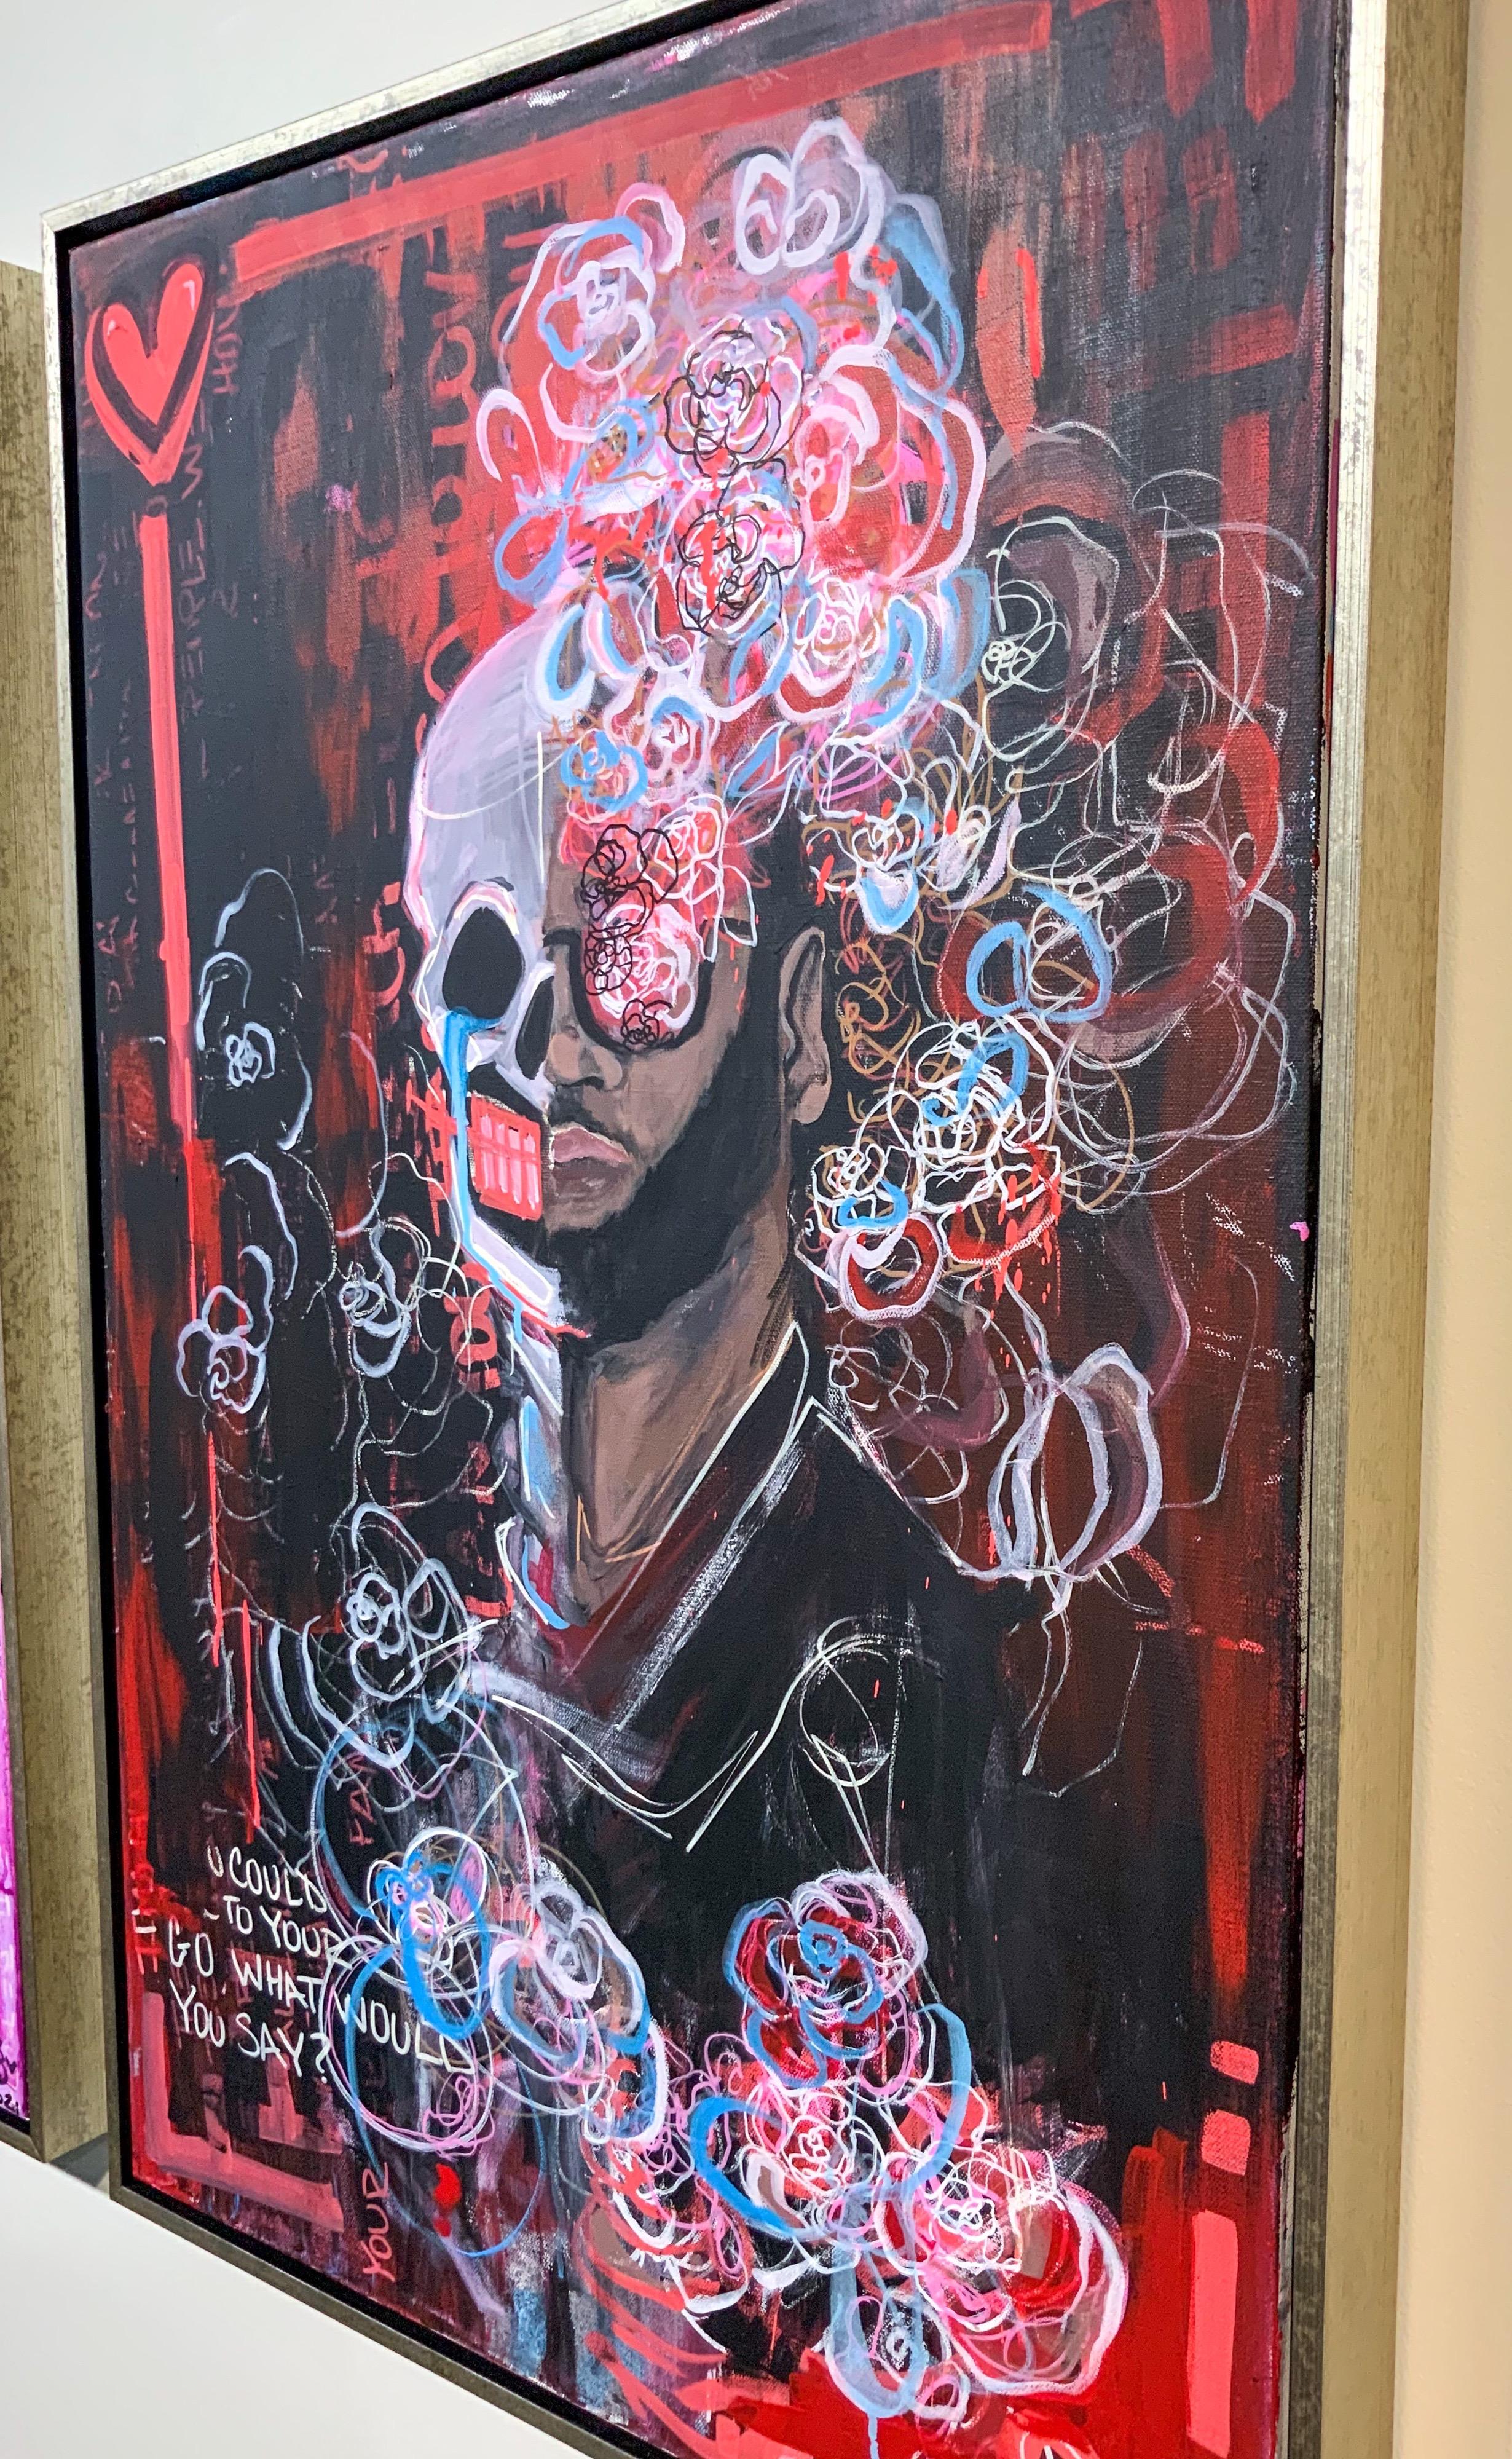 8 of Hearts- Red Tone Abstract Street Art Portrait on Canvas in Frame  - Painting by Makayla Binter 